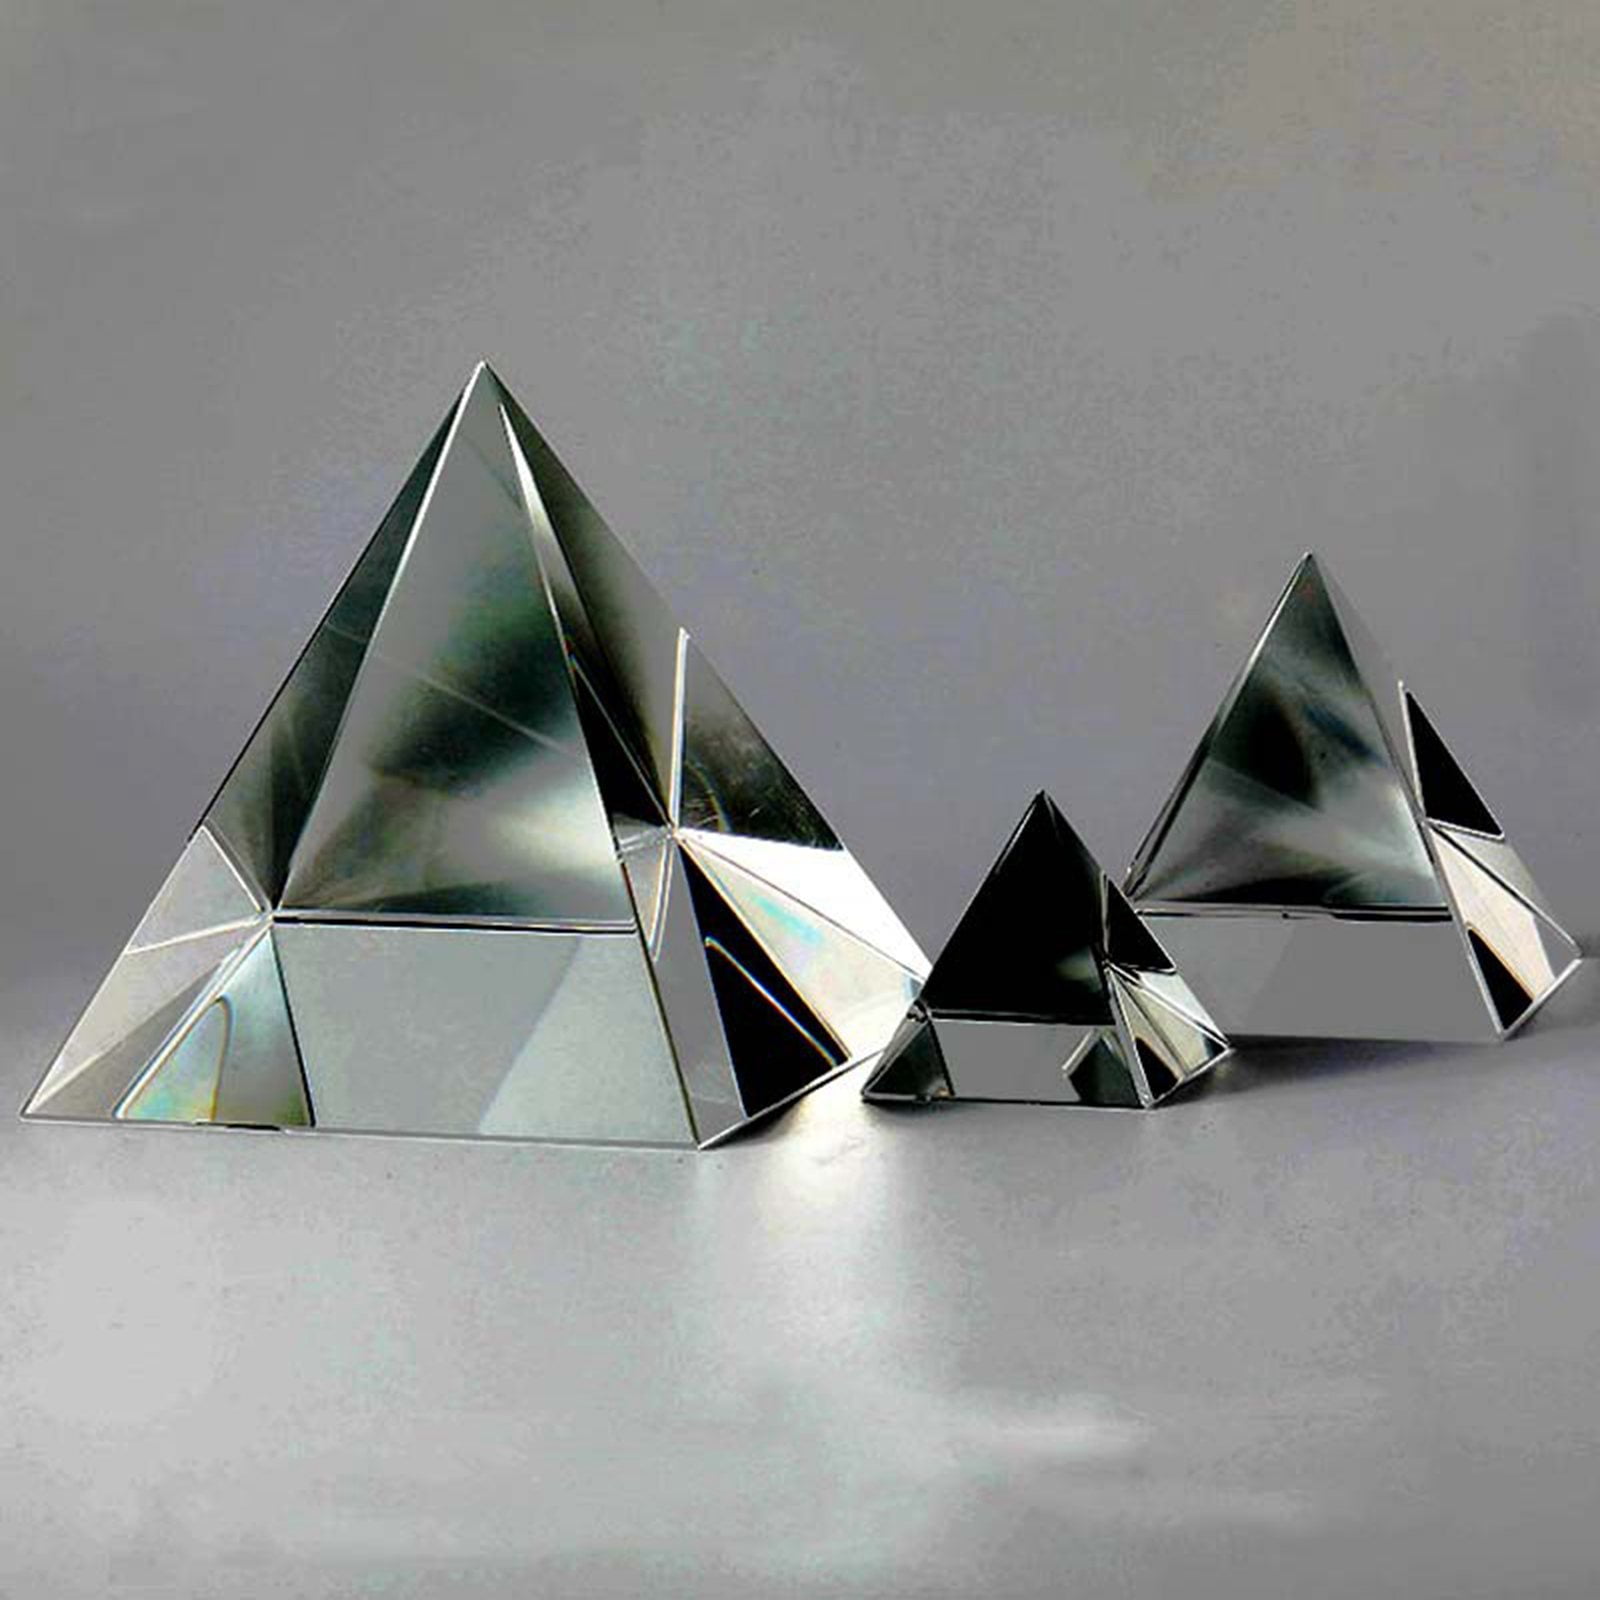 4 Inch K9 Crystal Pyramid Prism Suncatcher Paperweight Ornament Collections 